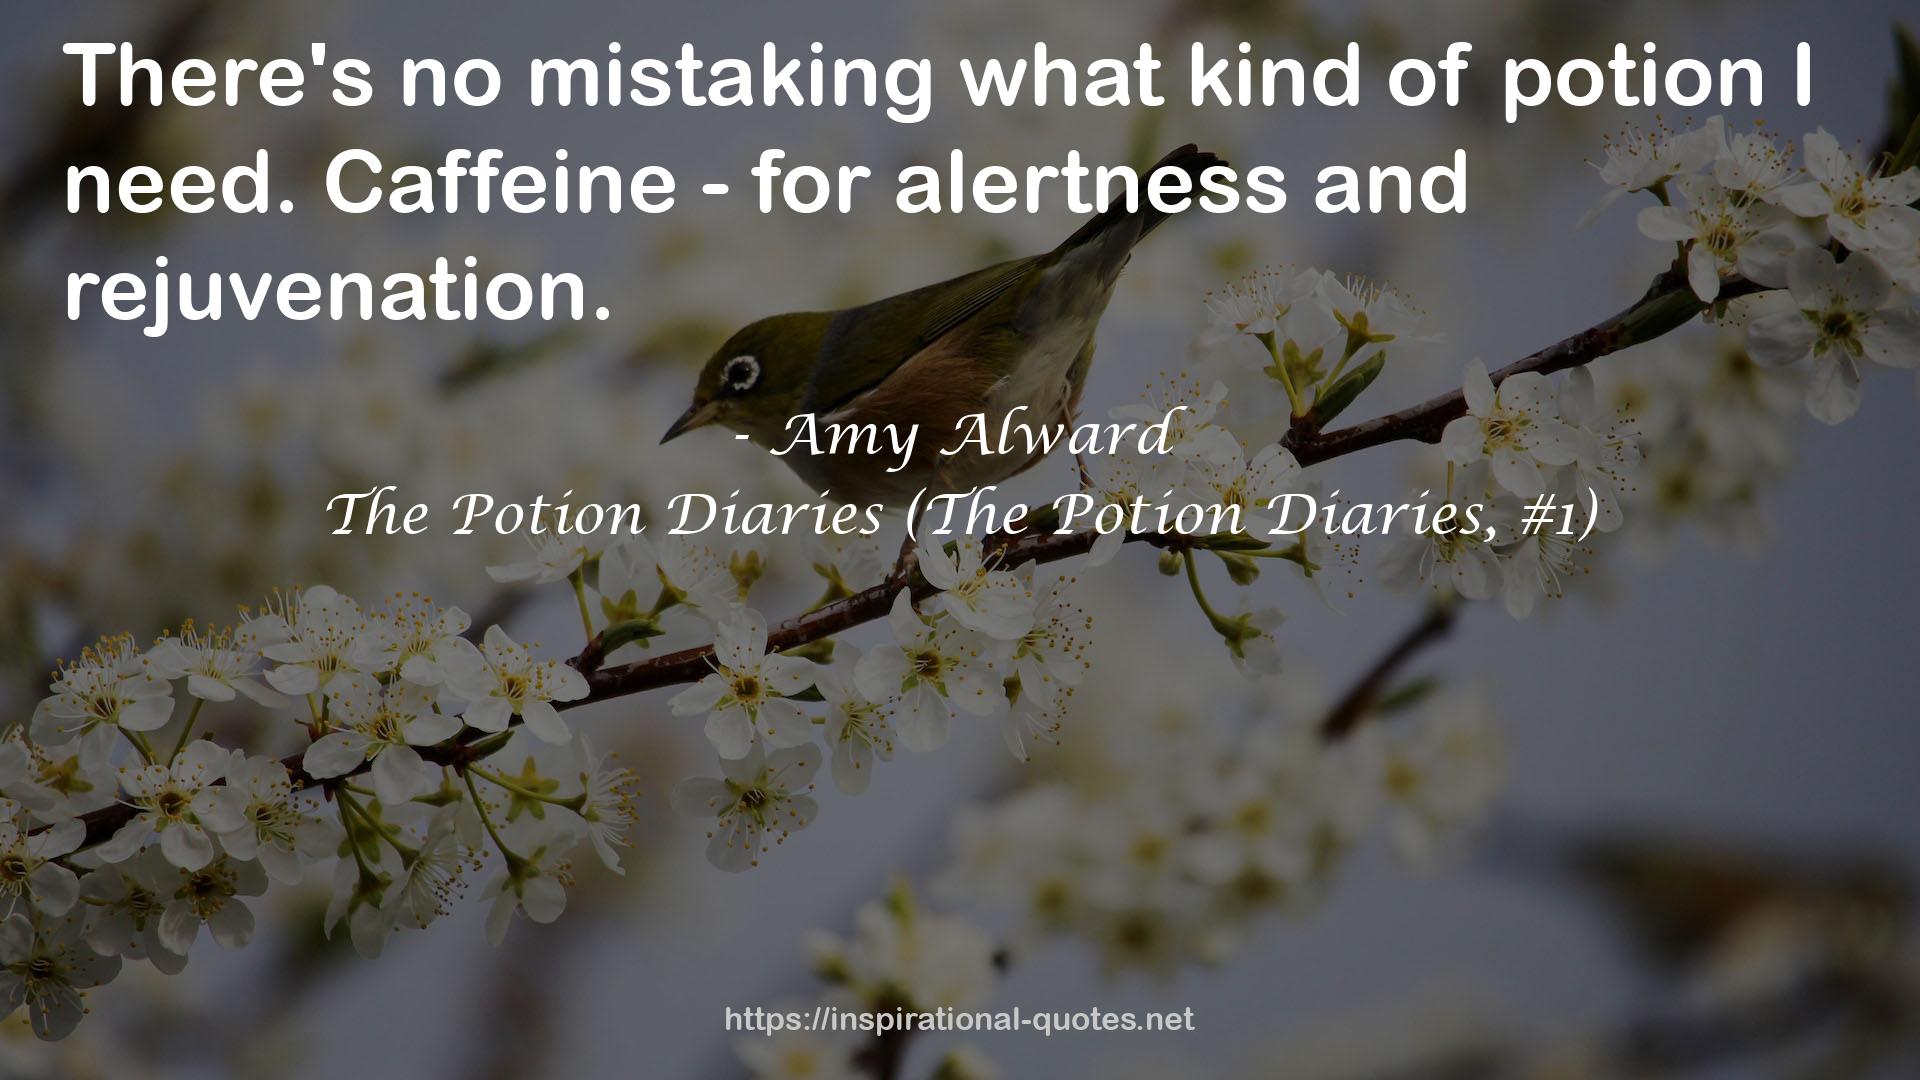 The Potion Diaries (The Potion Diaries, #1) QUOTES